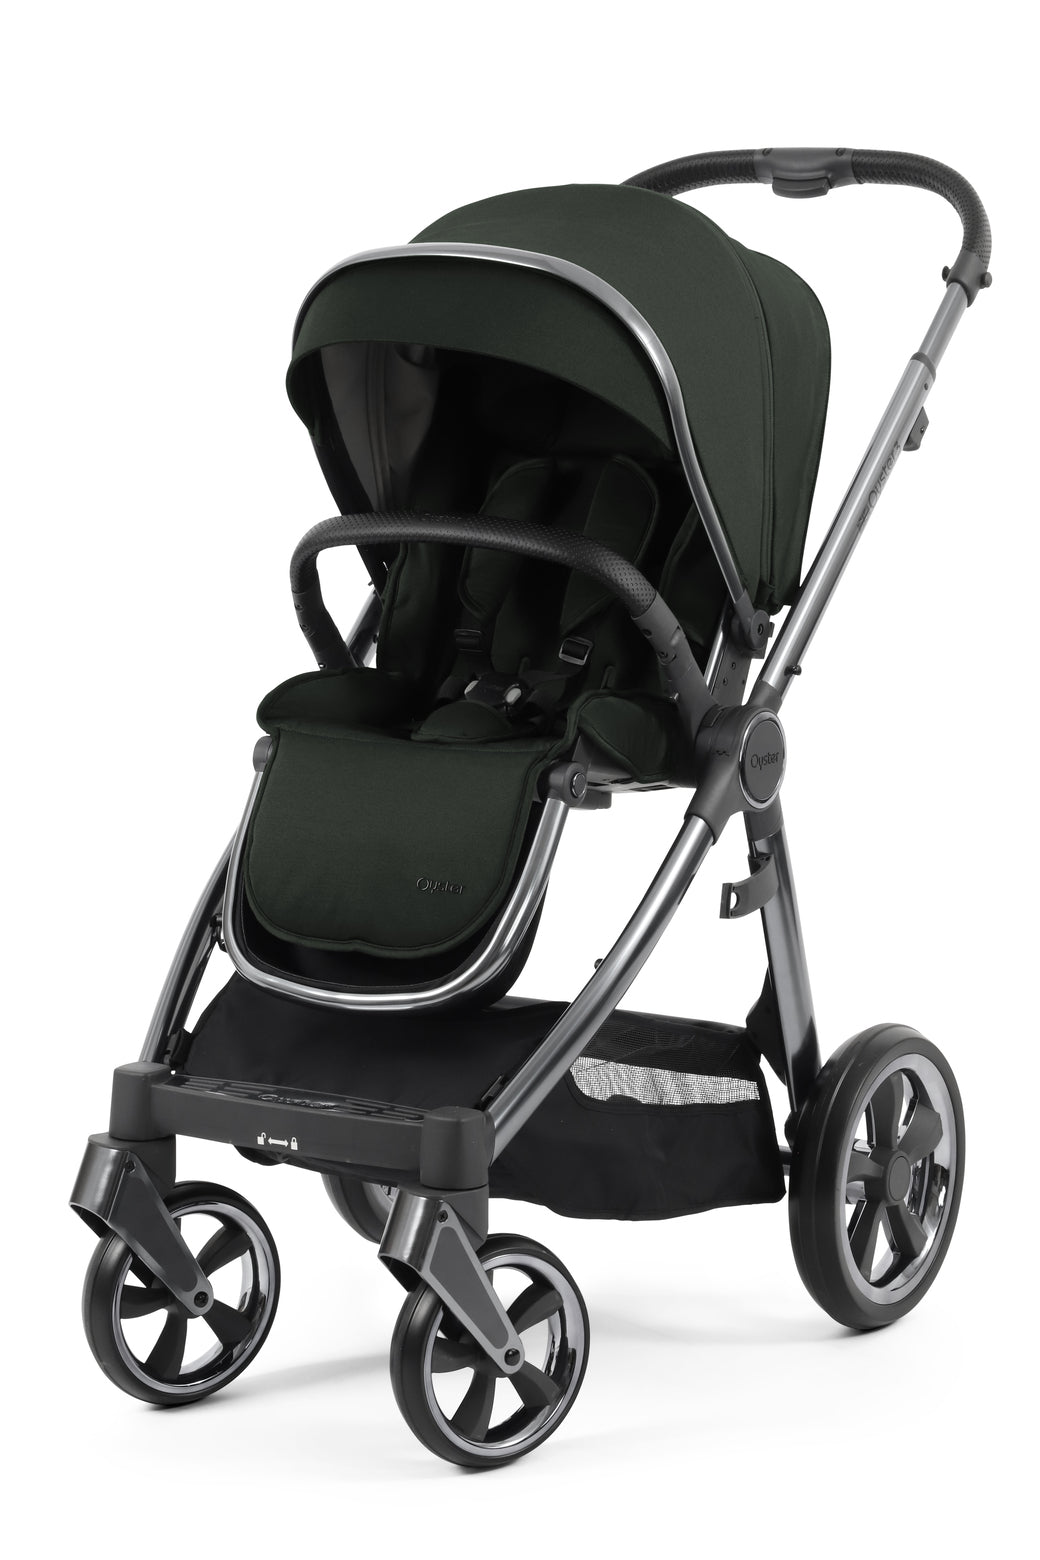 Babystyle Oyster 3 Pushchair + Carrycot - Black Olive - For Your Little One